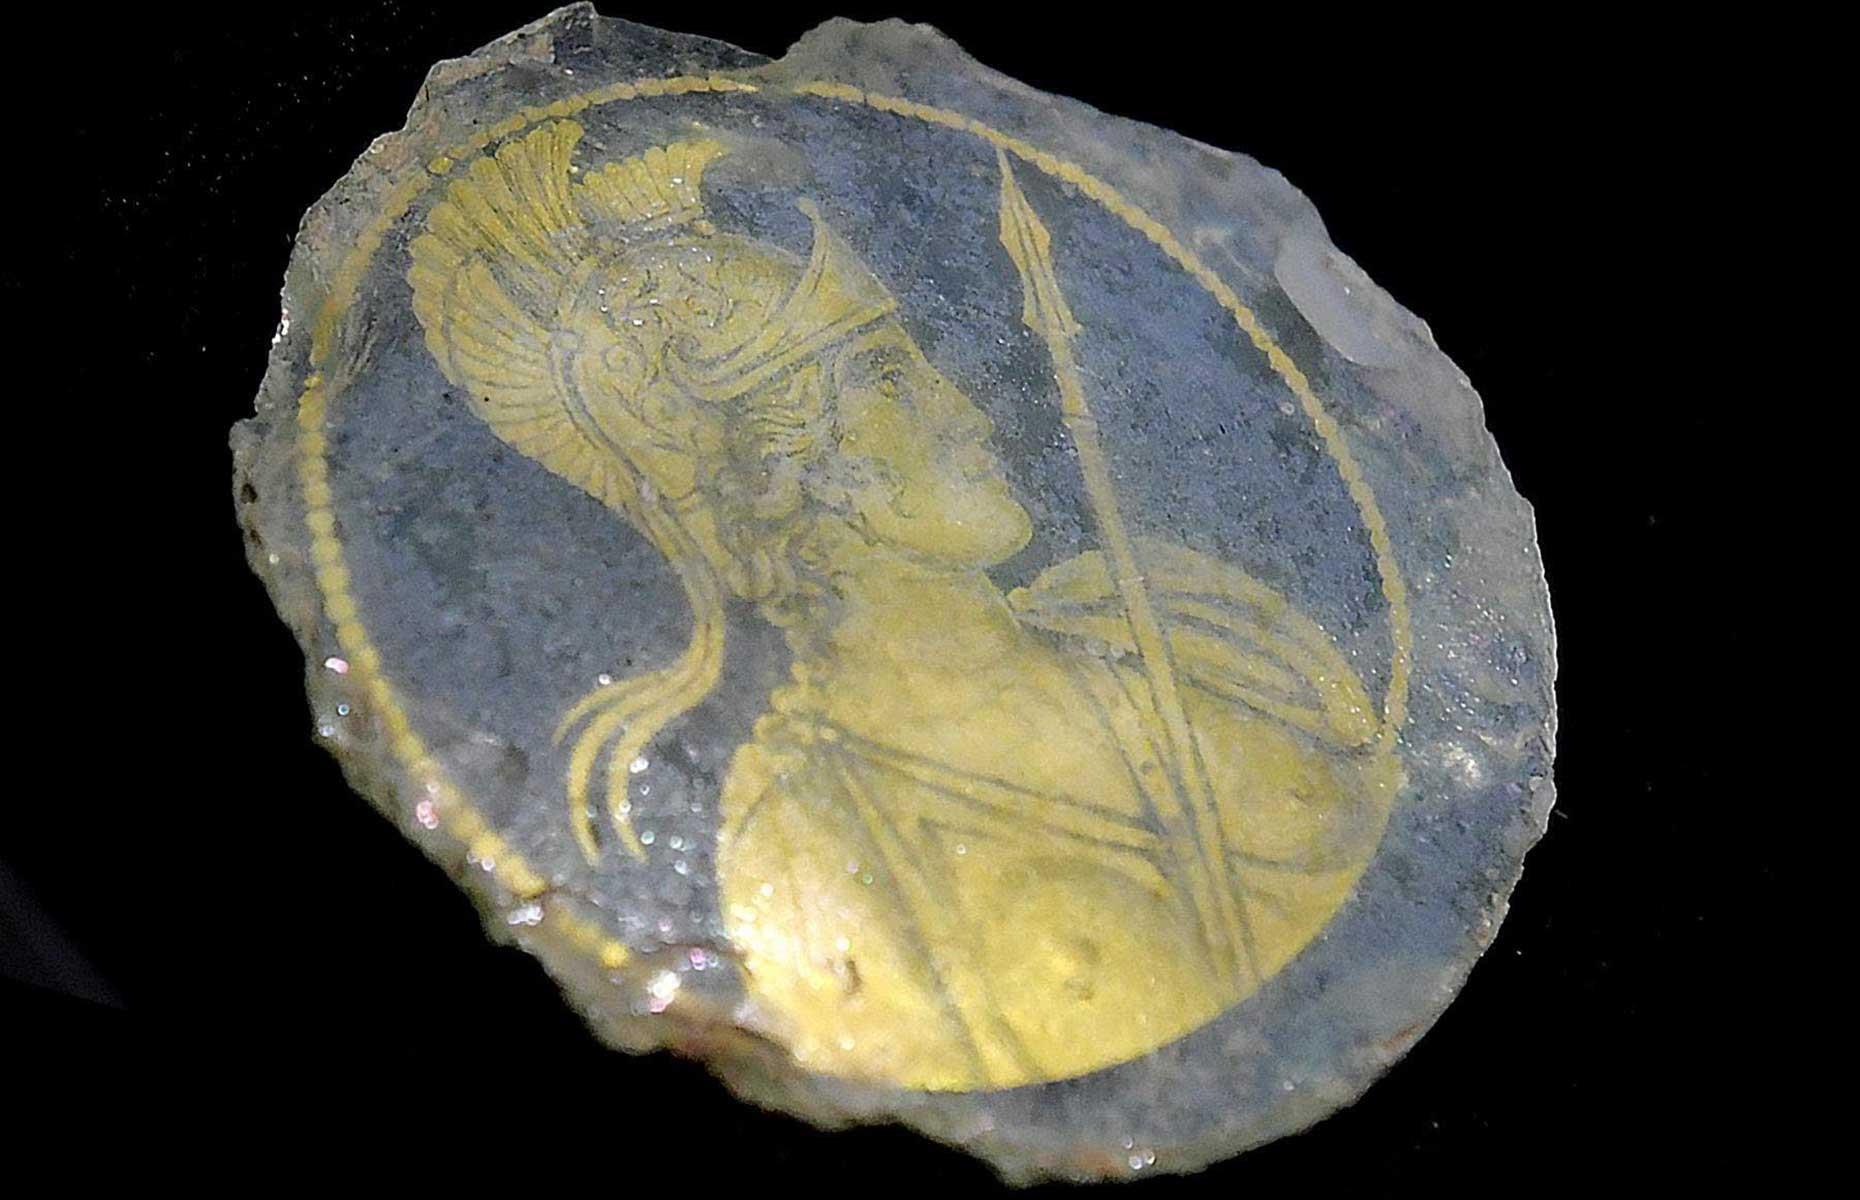 <p>During construction of a new metro station in Rome, workers discovered <a href="https://www.smithsonianmag.com/smart-news/construction-workers-unearthed-this-golden-glass-depicting-the-goddess-of-rome-180981629/">this unique golden glass fragment</a>. Dating back to the 4th century AD, the rare find depicts Roma (the goddess who personified ancient Rome) and may have once formed the bottom of a drinking glass. It’s the first artefact of its kind ever found, with the use of gold leaf suggesting it was a luxury item. When the new metro station opens in 2024, it'll also house a small museum displaying the fragment alongside other artefacts found nearby.</p>